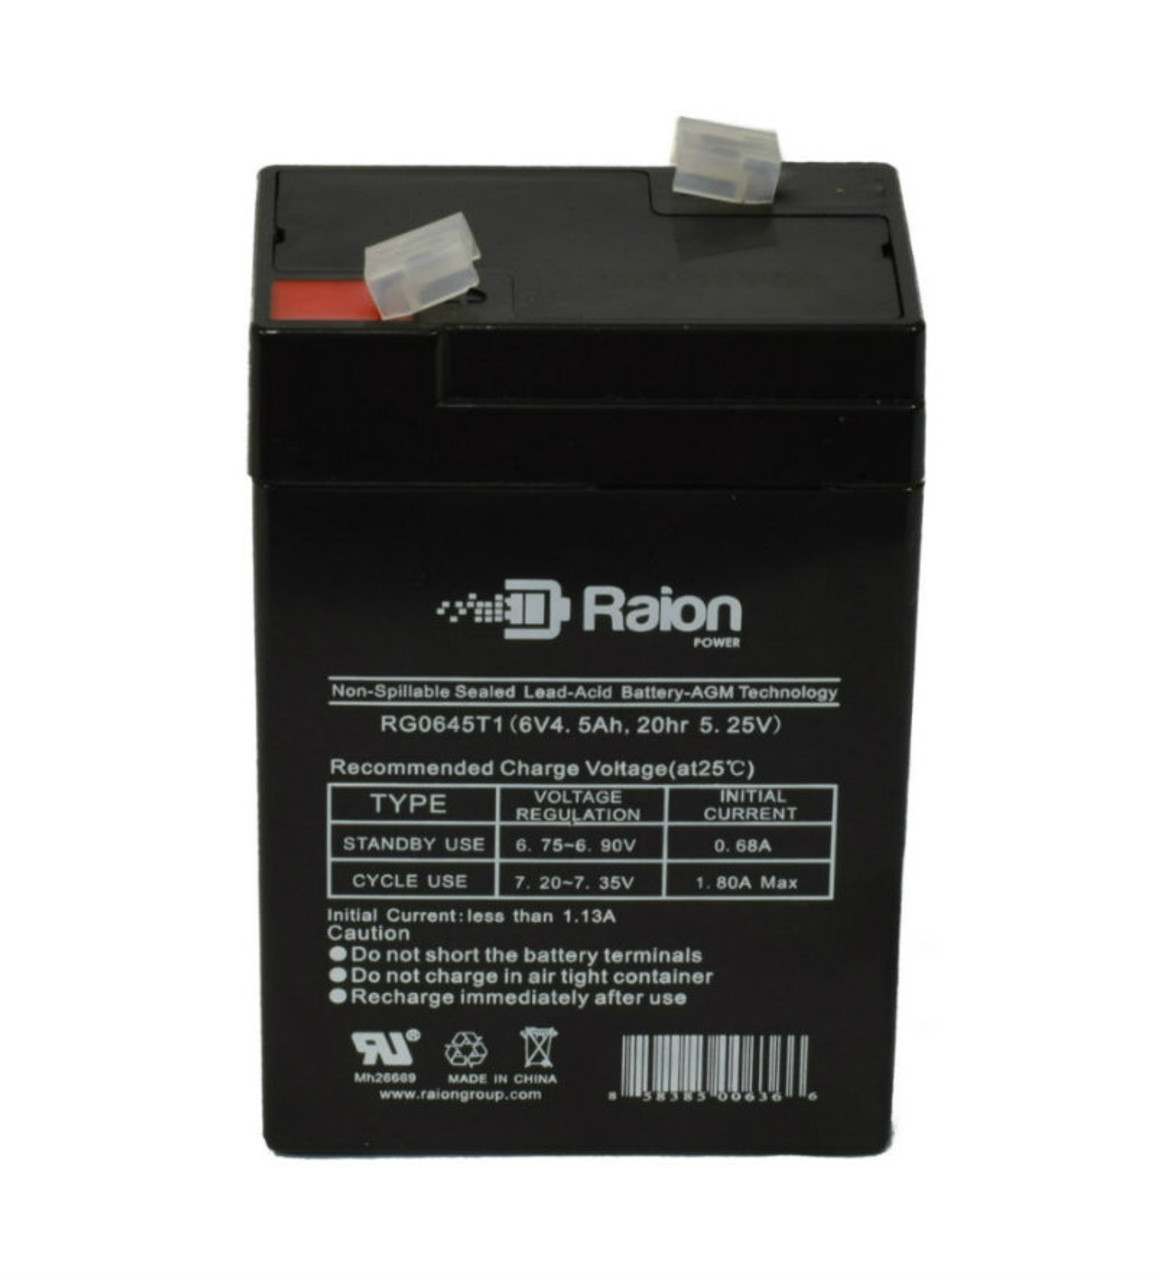 Raion Power RG0645T1 Replacement Battery Cartridge for Enersys NP4.5-6